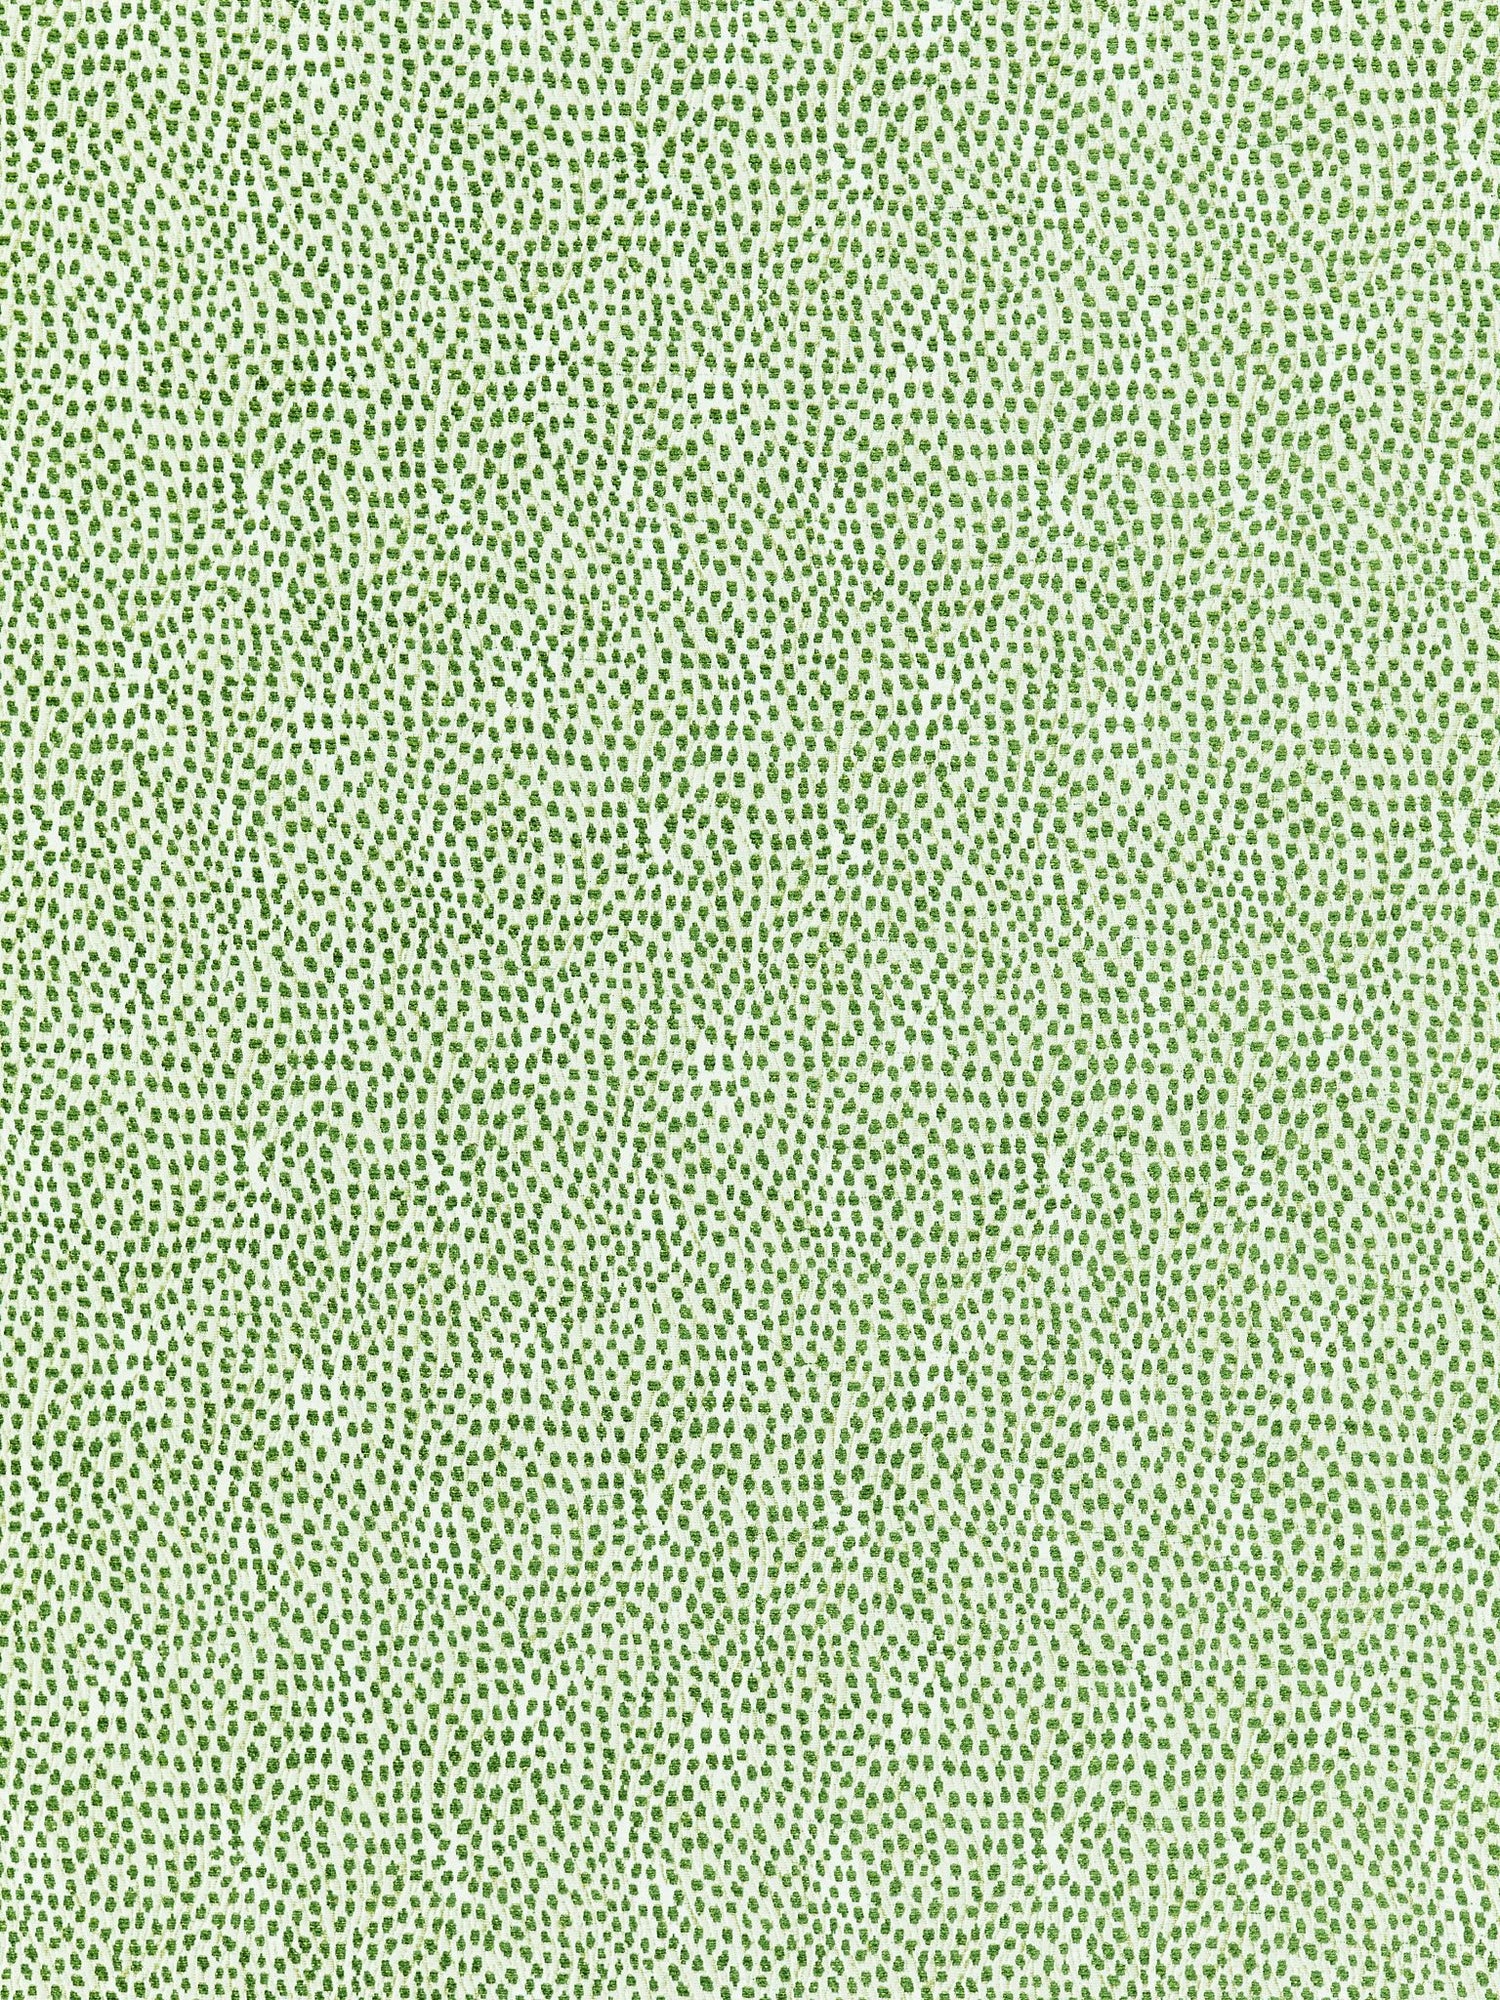 Flurry fabric in leaf color - pattern number BI 00031234 - by Scalamandre in the Old World Weavers collection